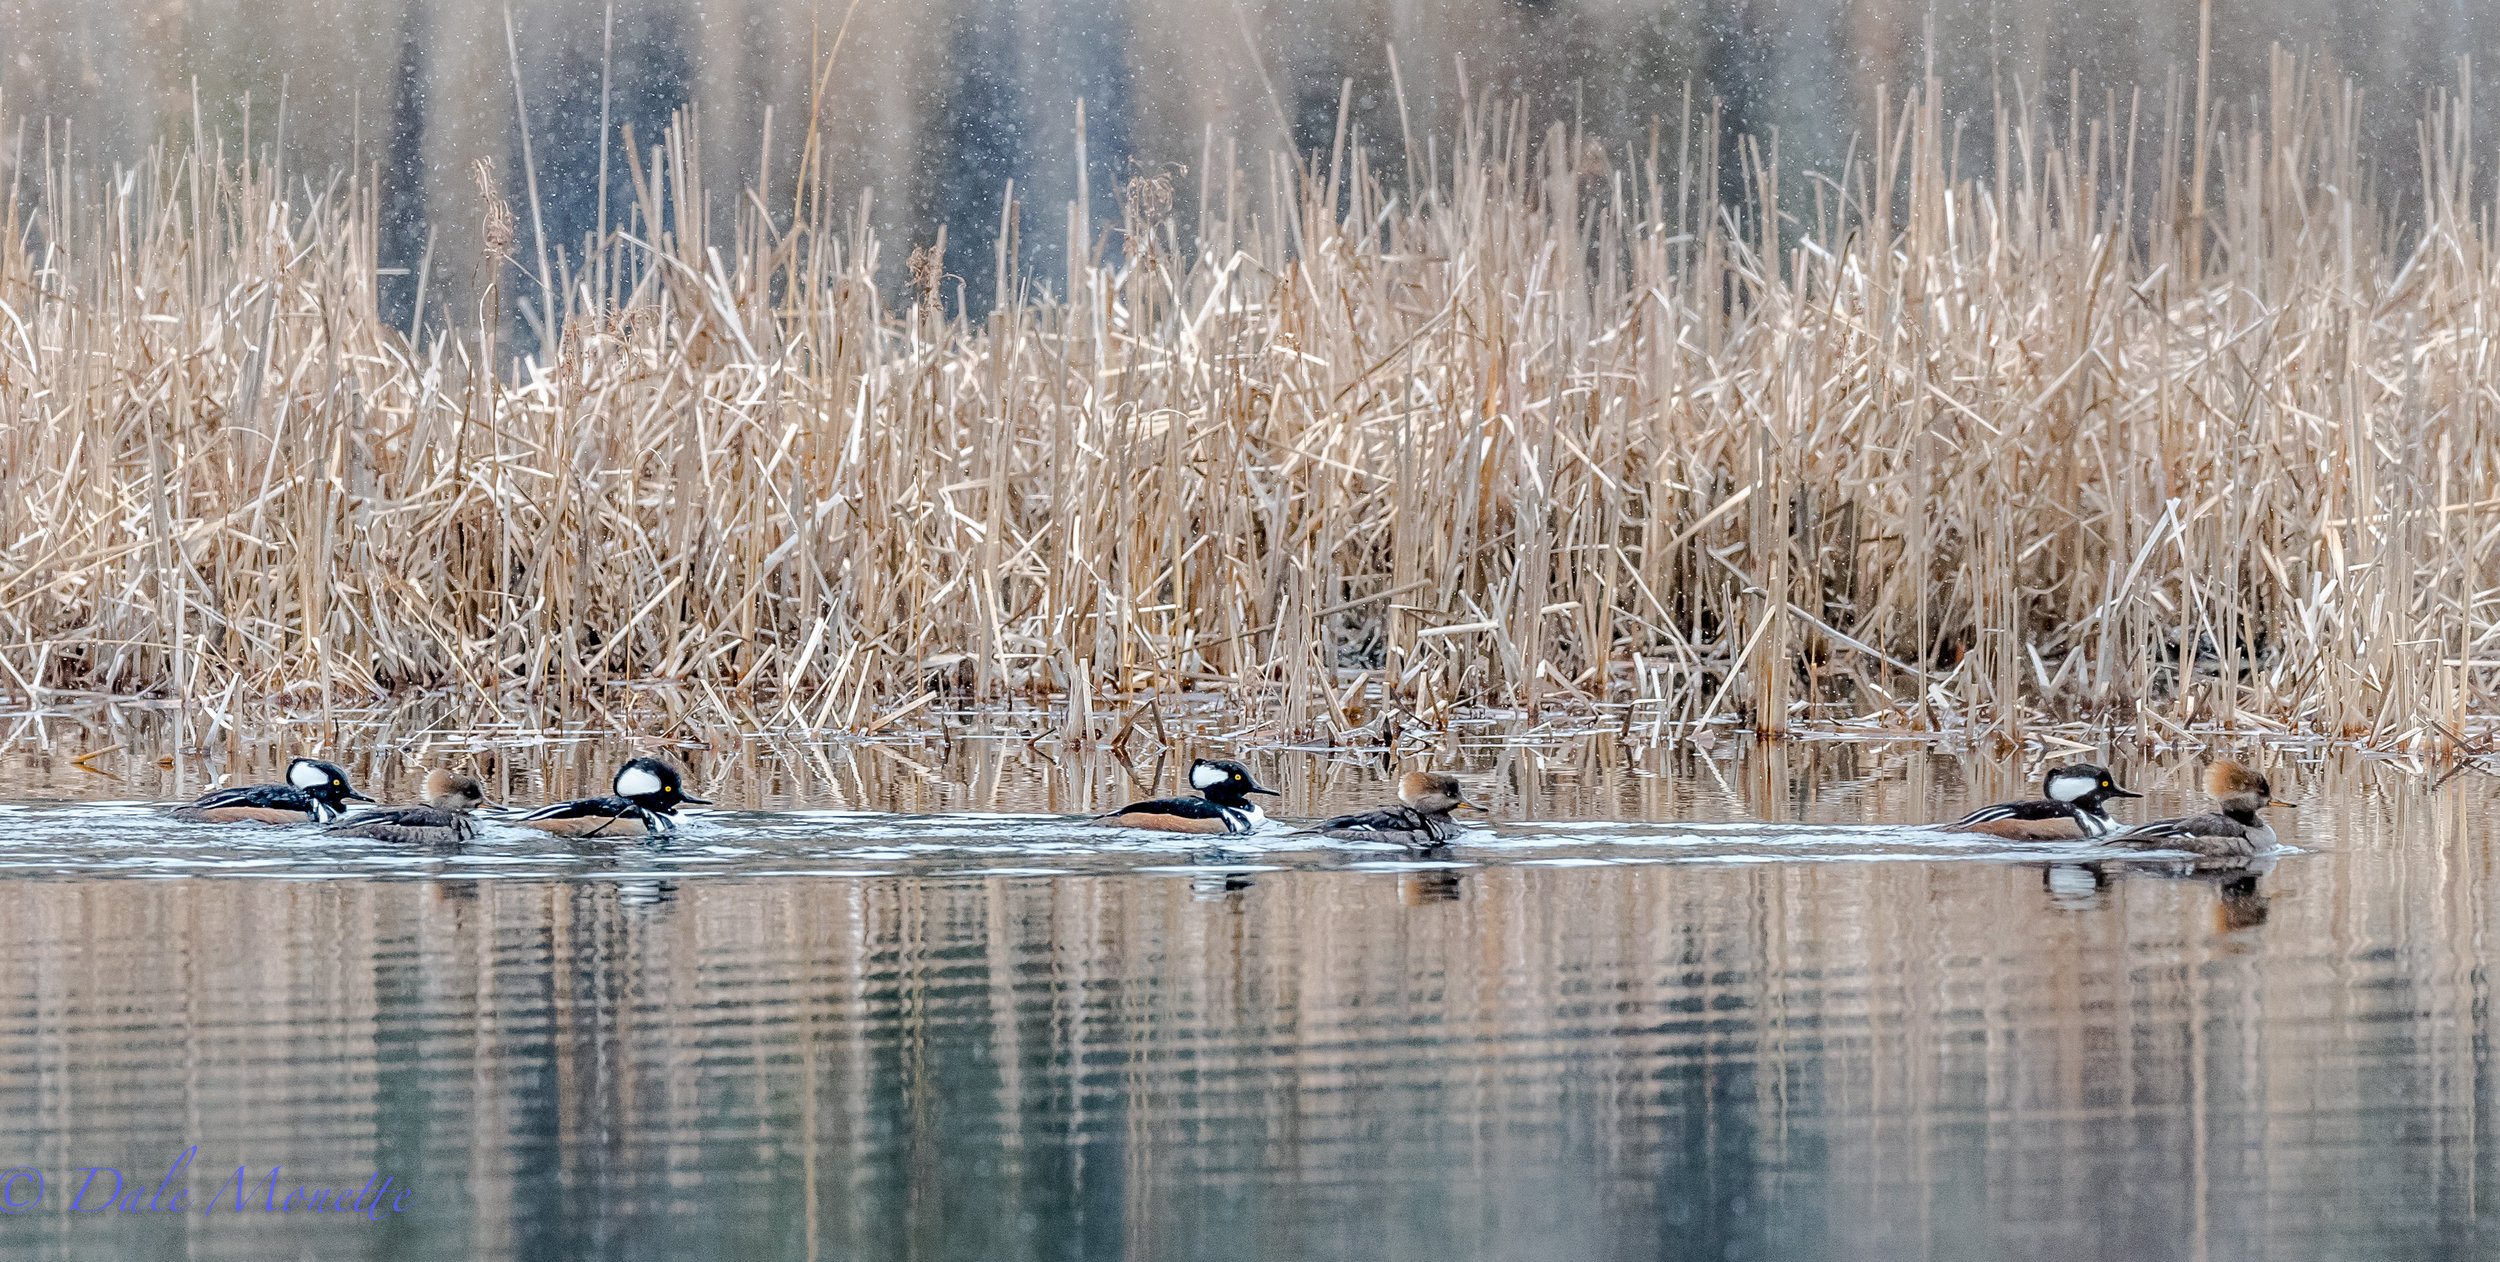   The ponds are opening up from ice and now the ducks are returning. &nbsp;Hooded mergansers. &nbsp;3/10/17  